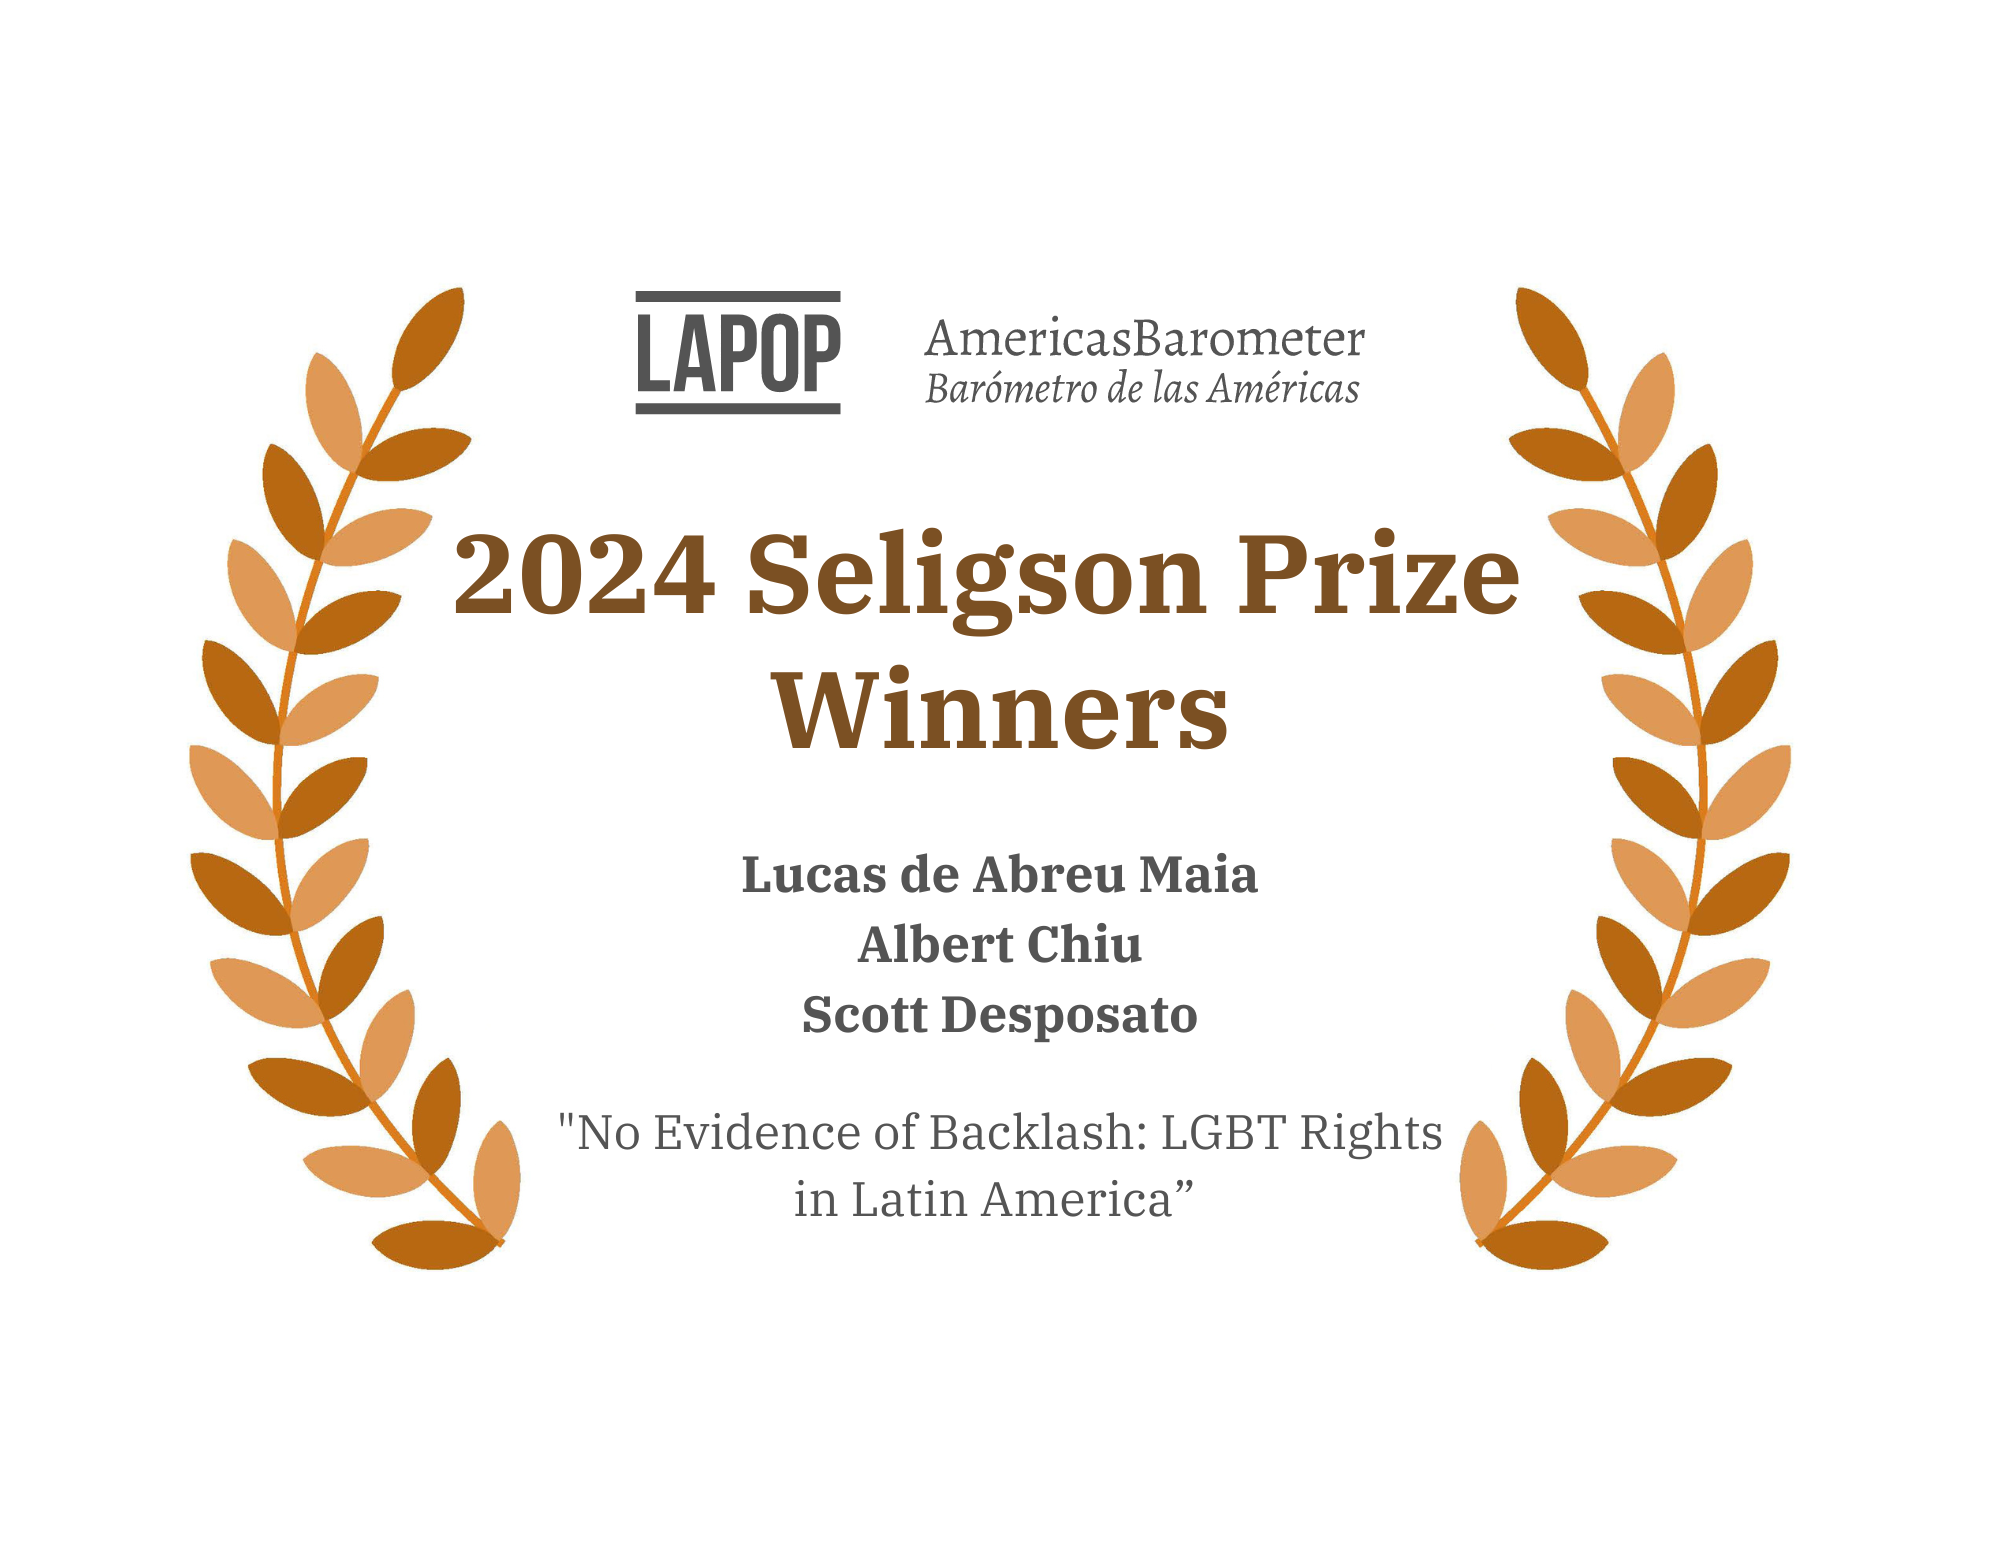 Congratulations to our 2024 Seligson Prize winners!